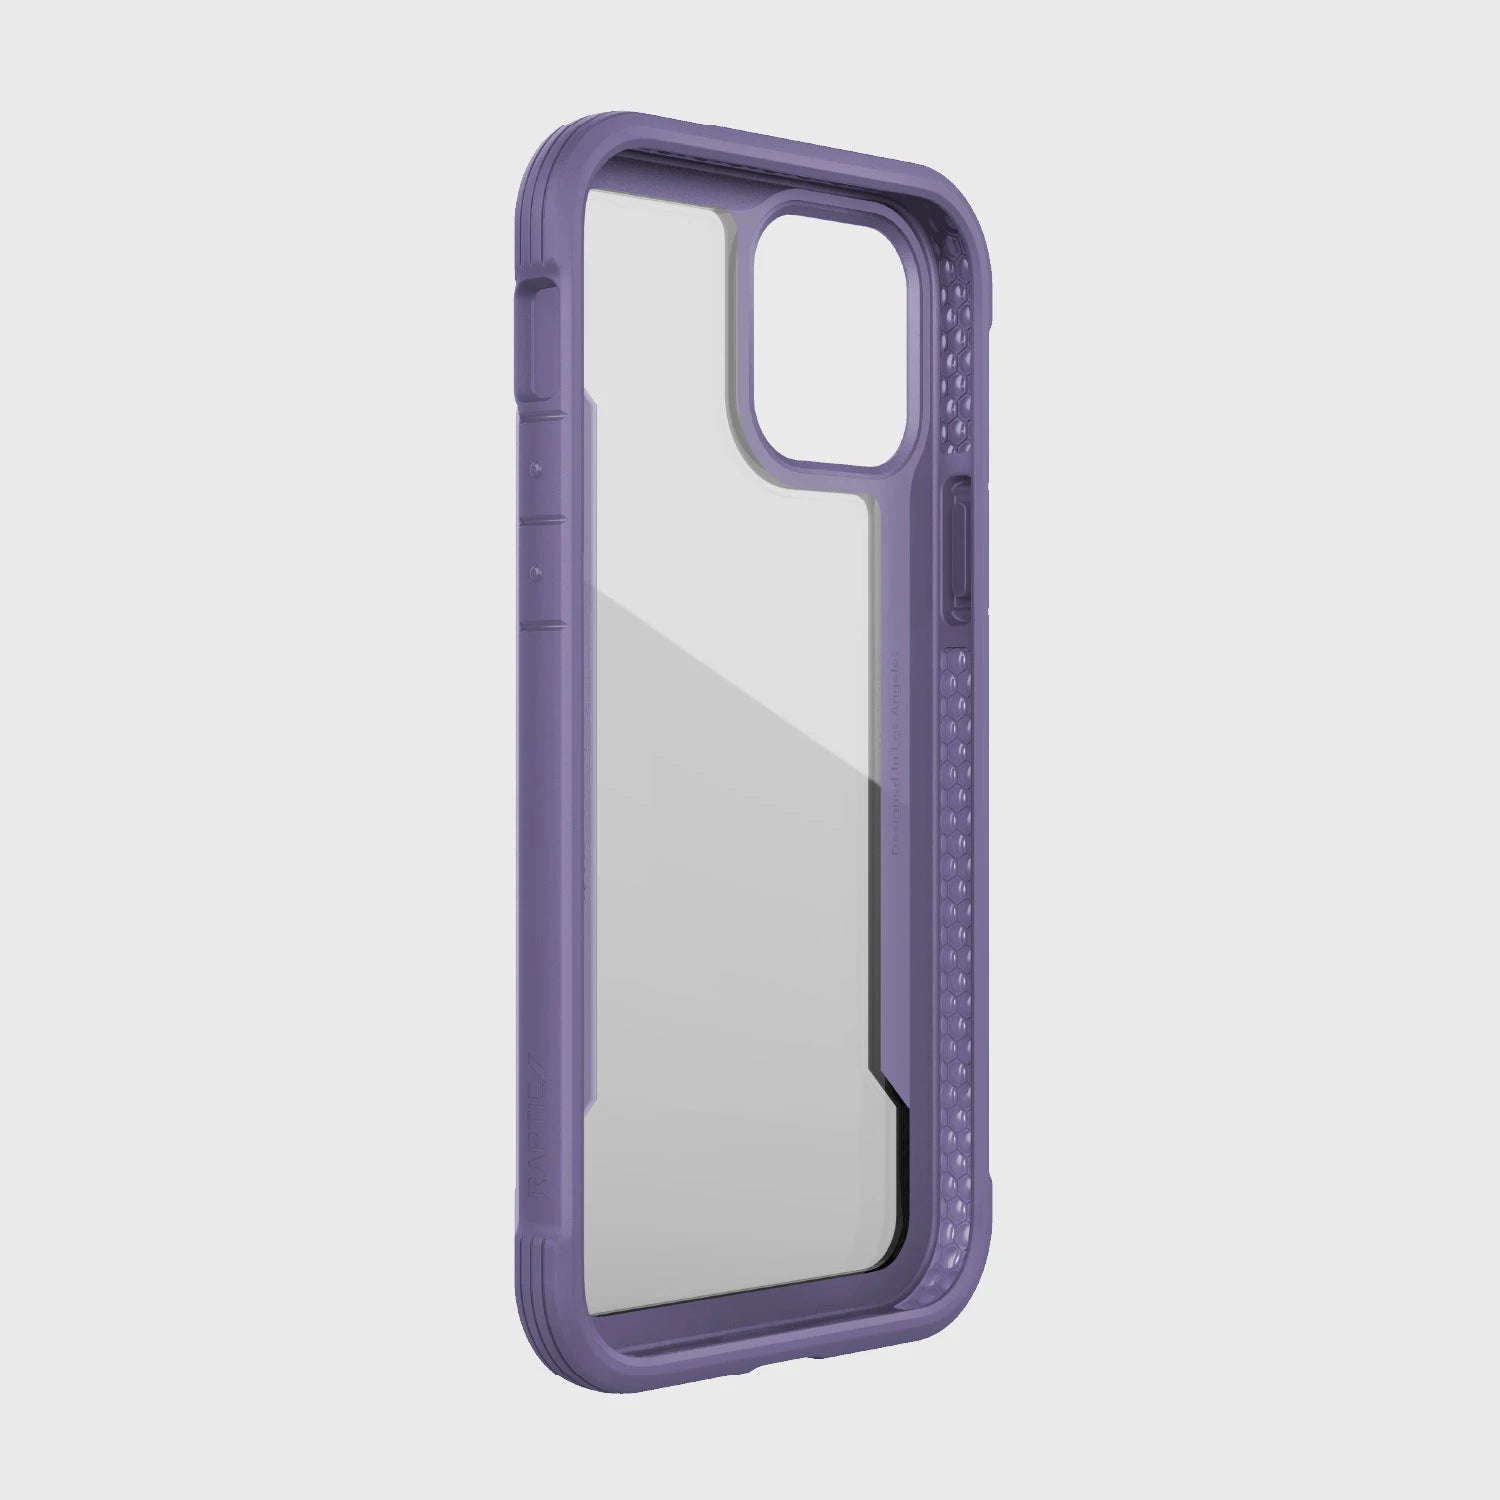 Raptic iPhone 12 Pro Max Case - SHIELD in purple color with foot drop protection.